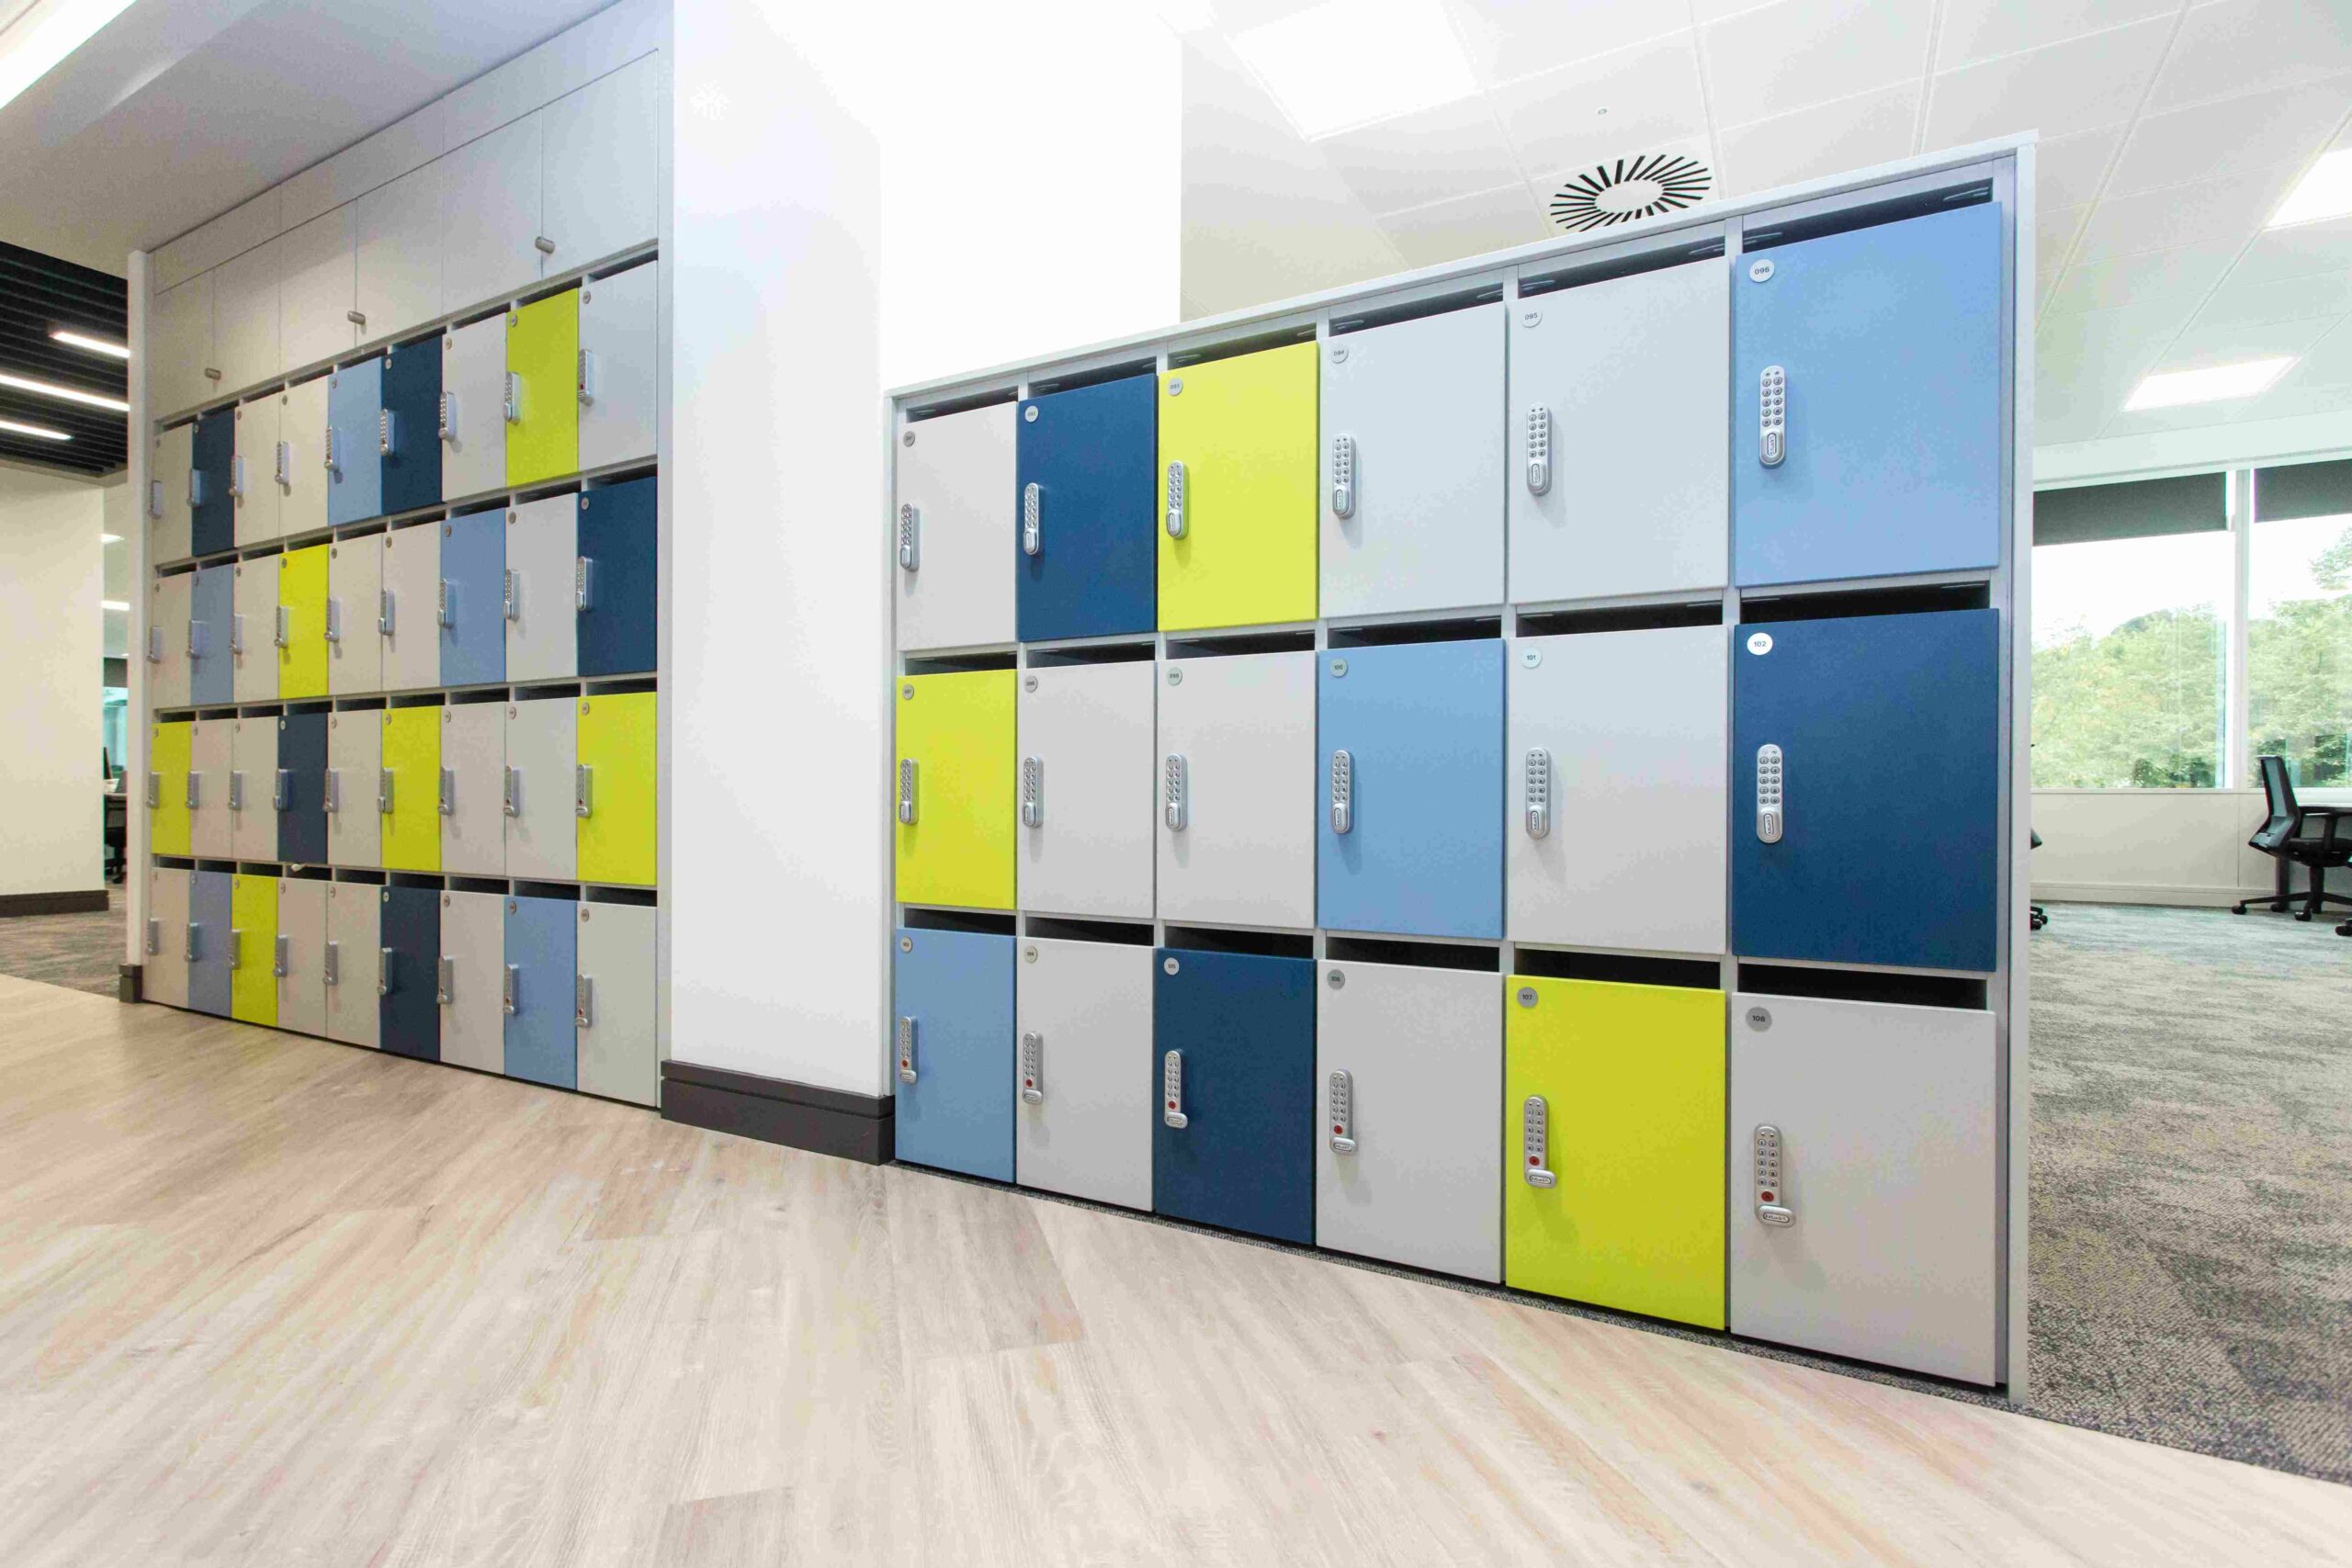 Multi-coloured lockers with coded locks on them.